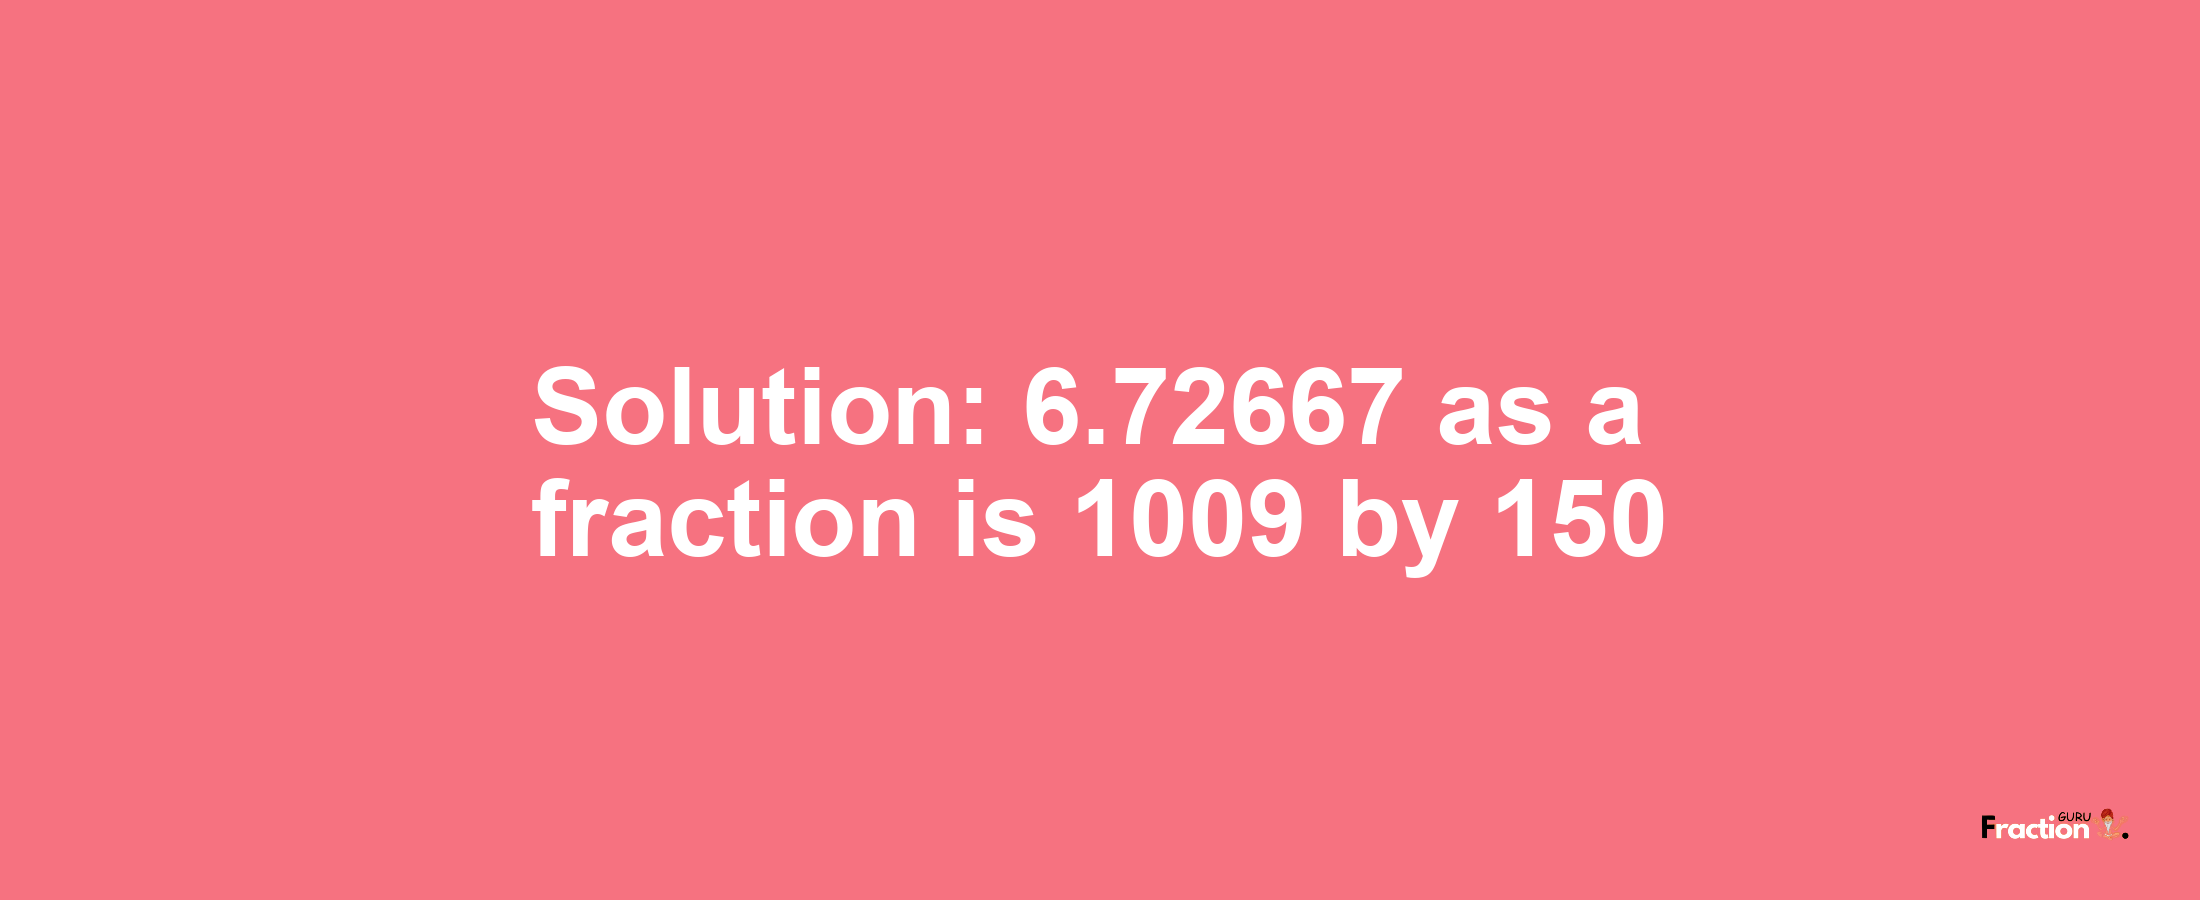 Solution:6.72667 as a fraction is 1009/150